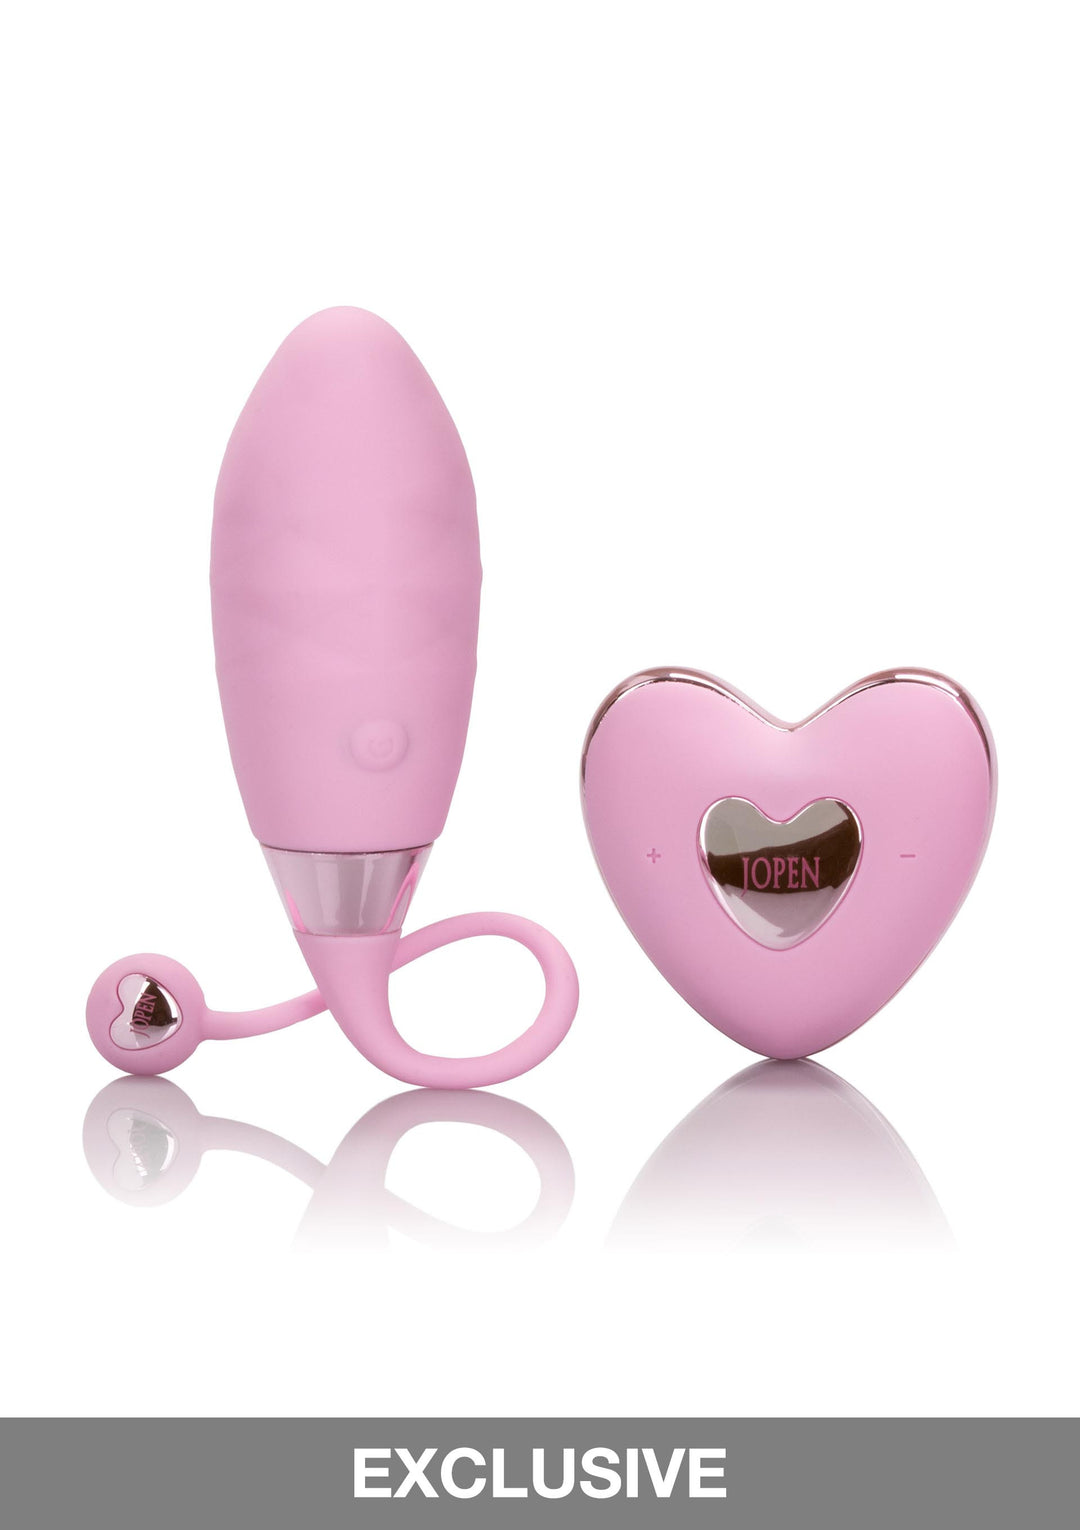 Amour Remote Bullet rechargeable vibrating vaginal egg